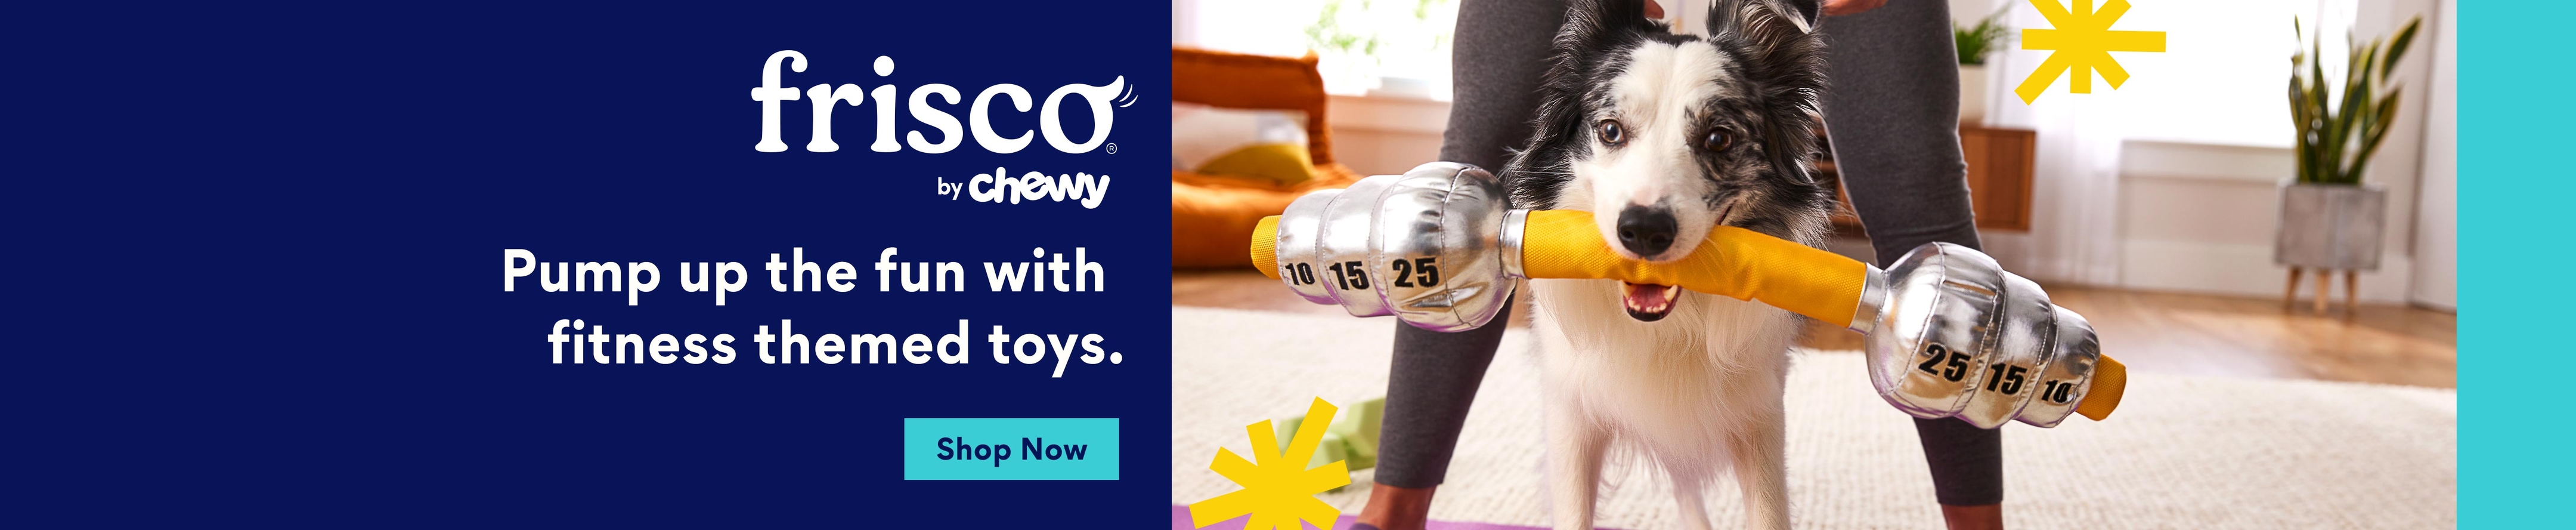 Frisco by chewy. Pump up the fun with fitness themed toys. Shop now